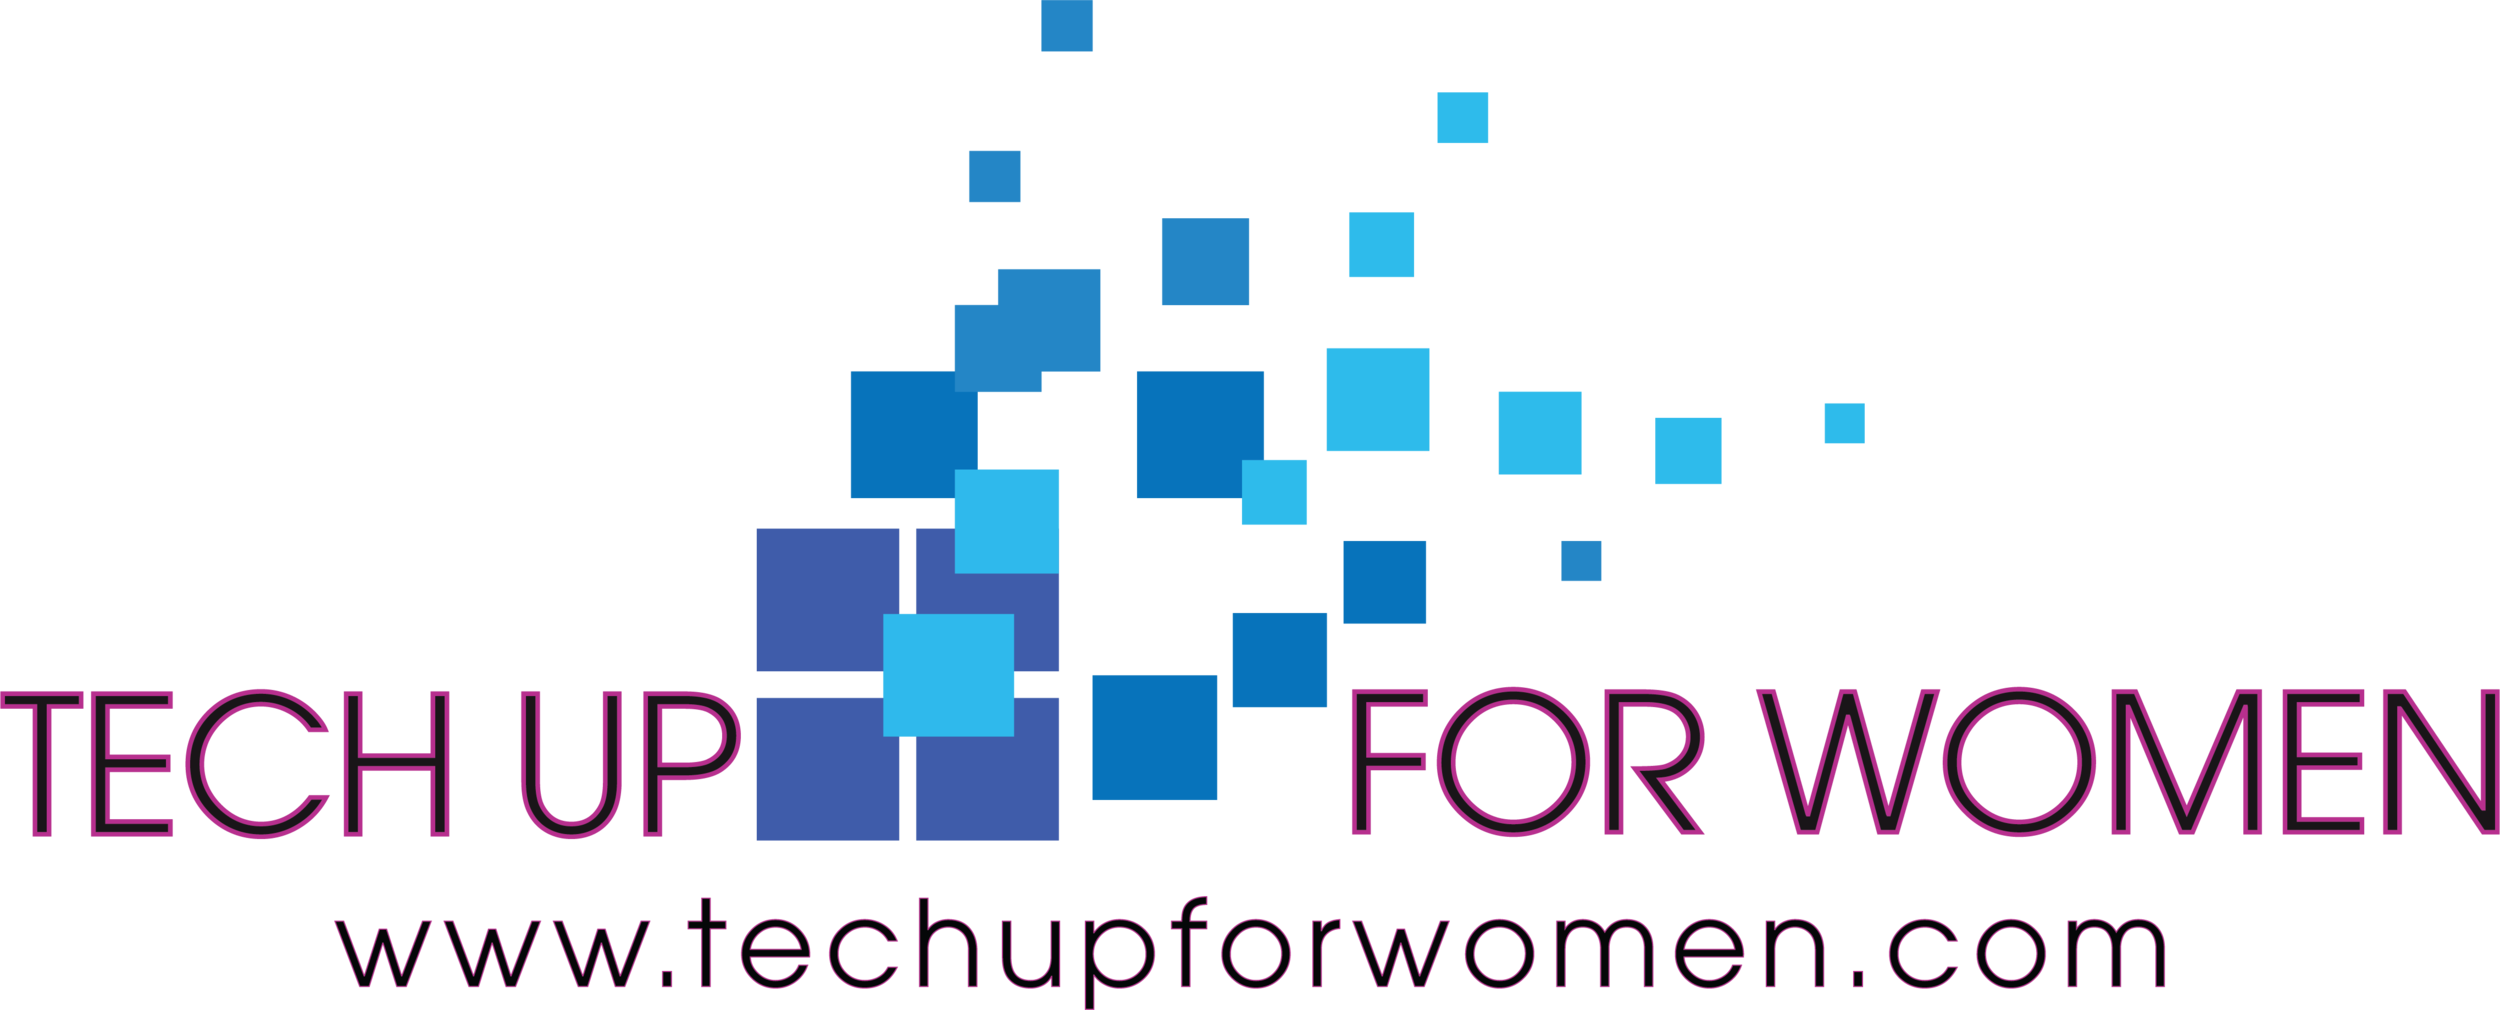 Tech Up for Women Logo and Website (for light background).png